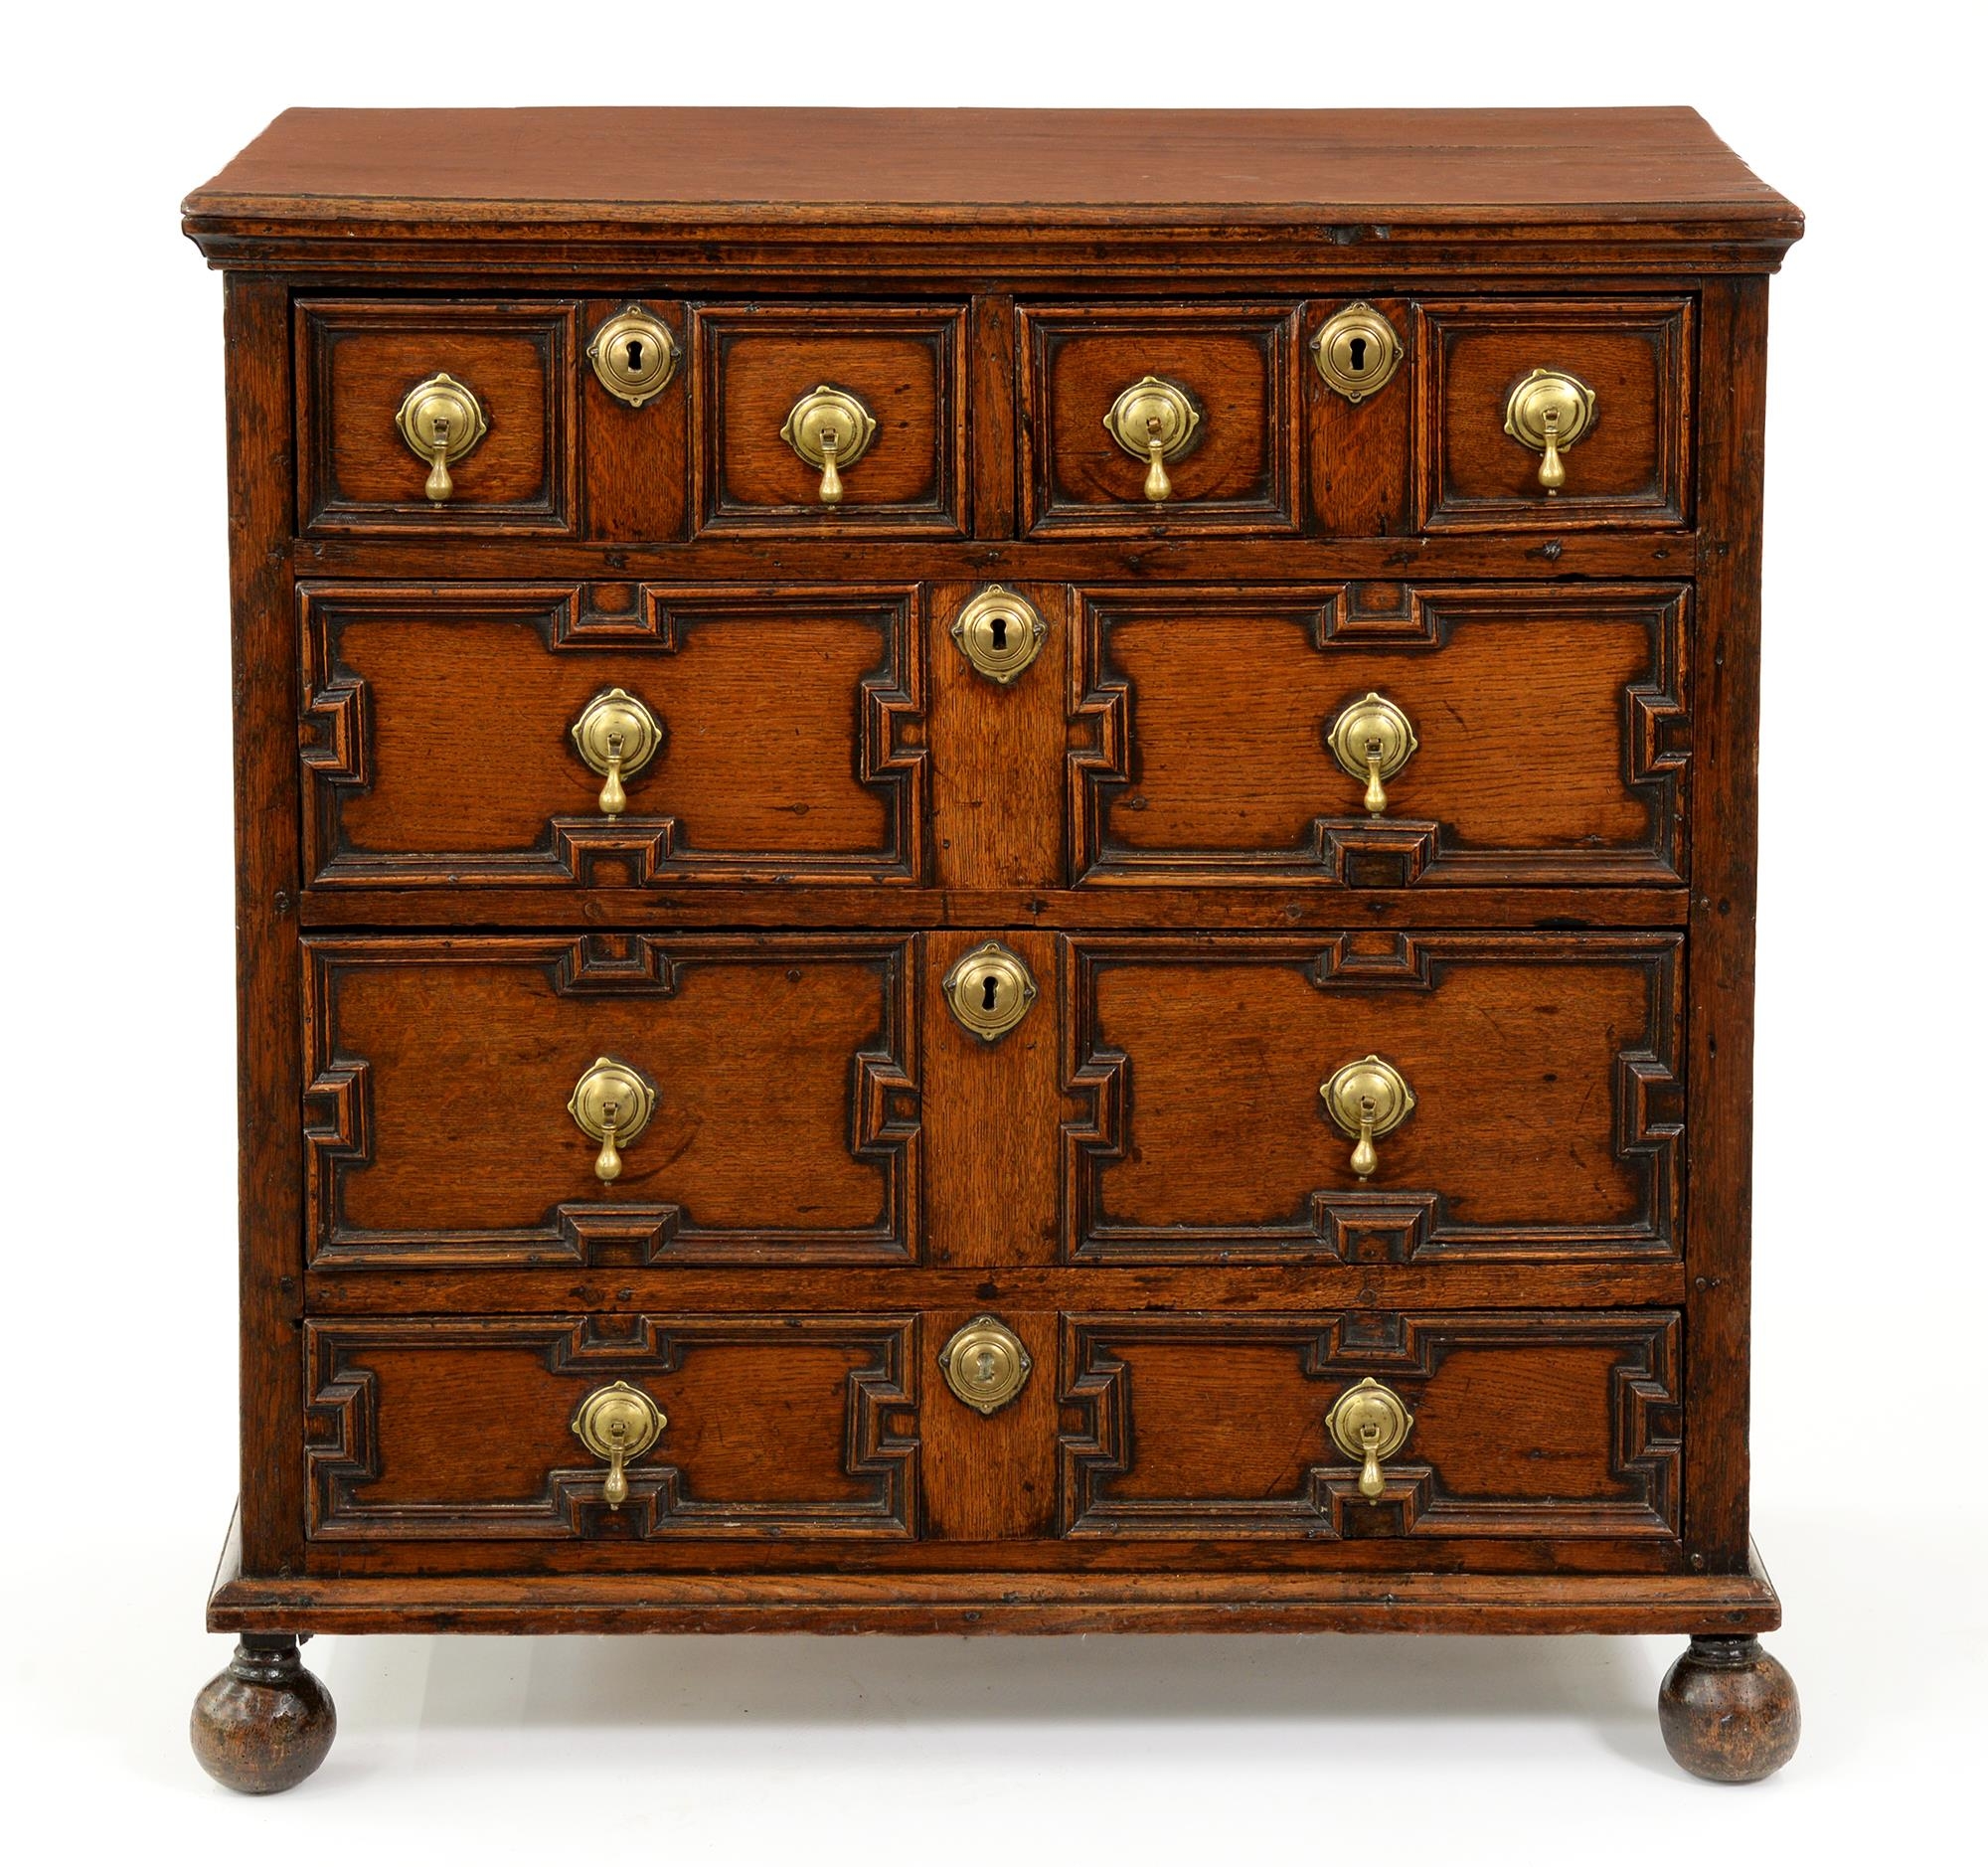 A William III oak chest of drawers, early 18th c, with two short and two long geometrically